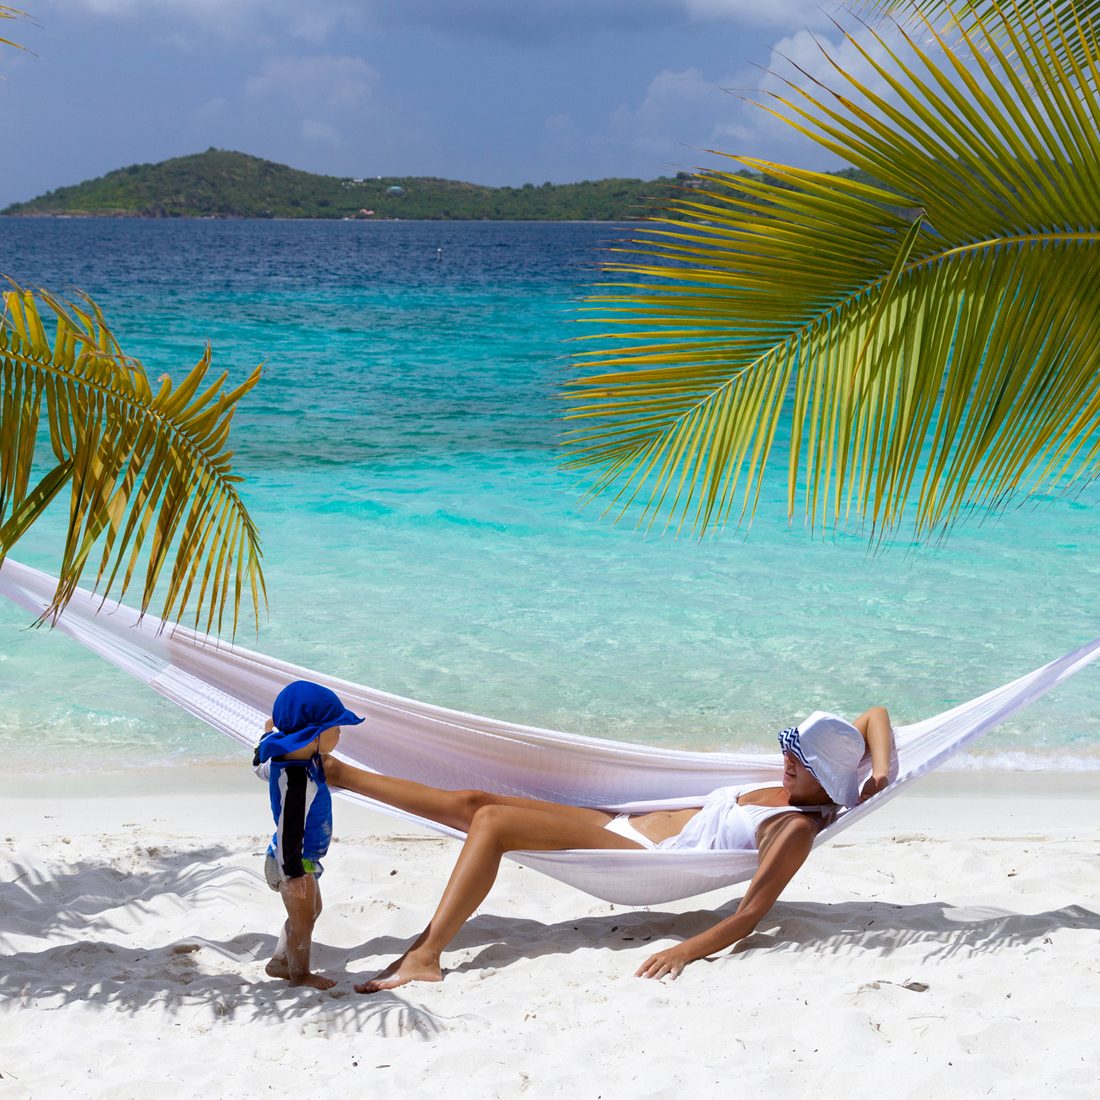 mother and child relaxing in hammock on tropical beach in the Caribbean